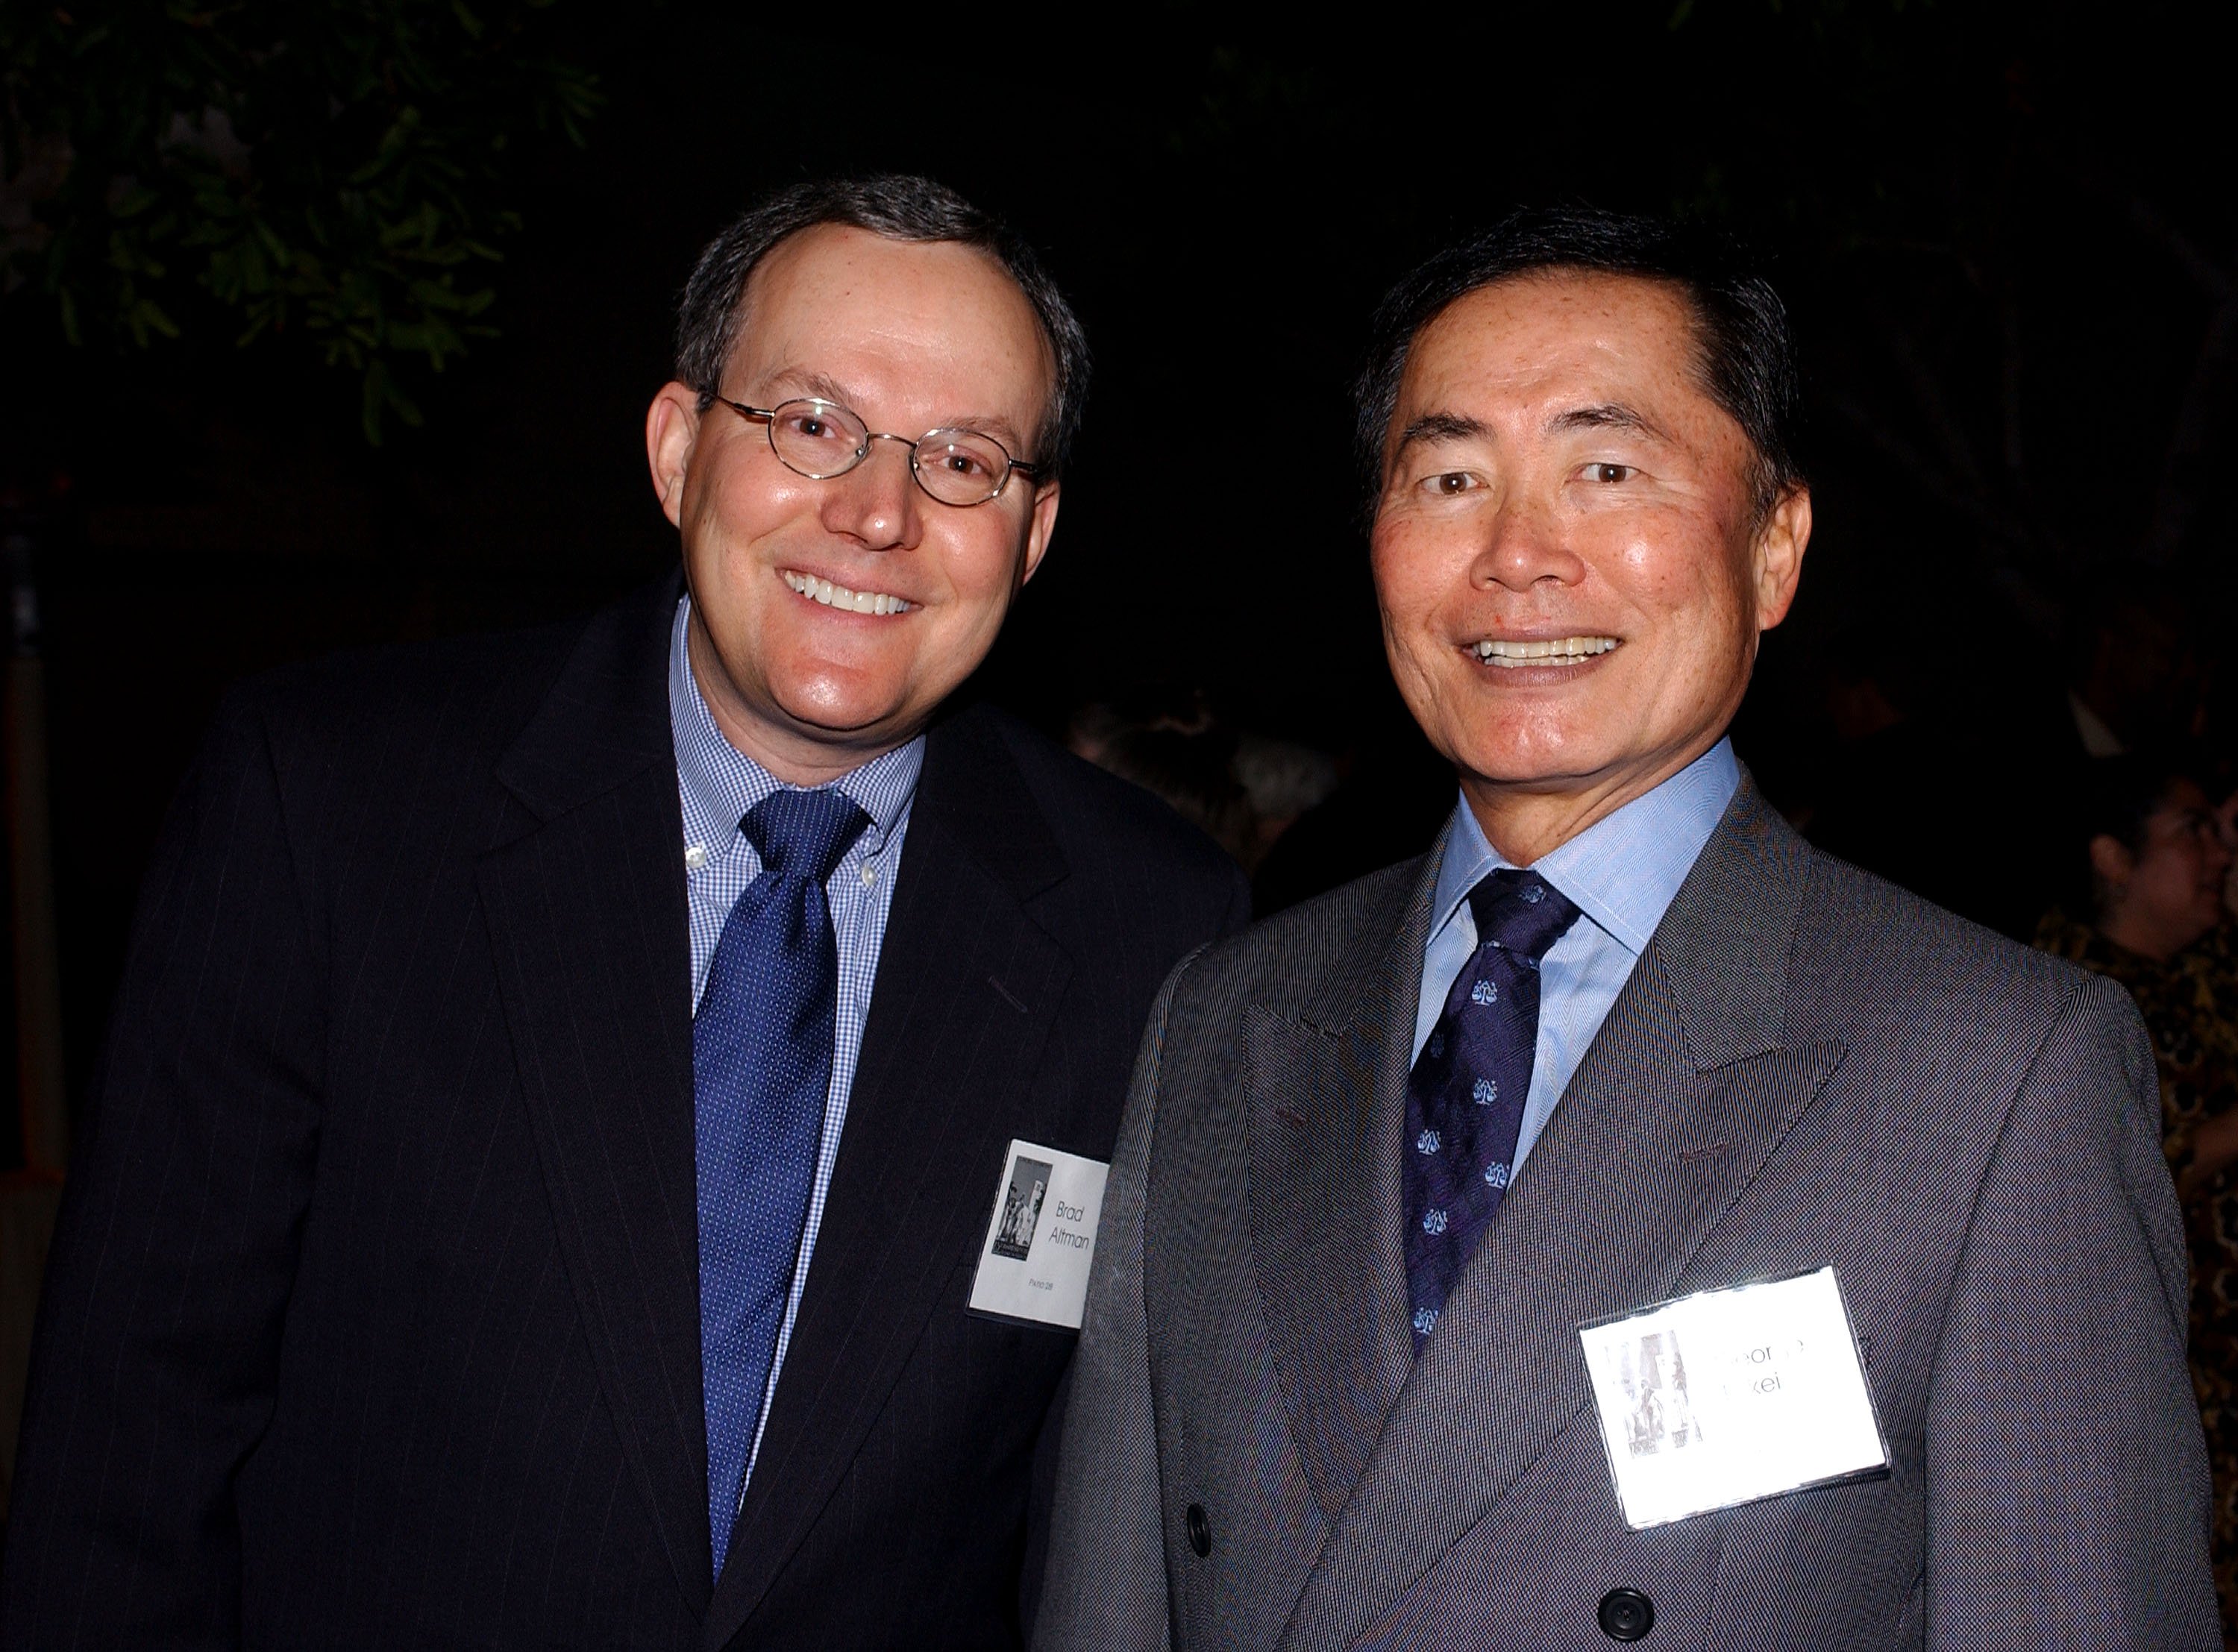 Brad Altman and George Takei at the Los Angeles Conservancy 25th Anniversary Gala on October 11, 2003 | Source: Getty Images